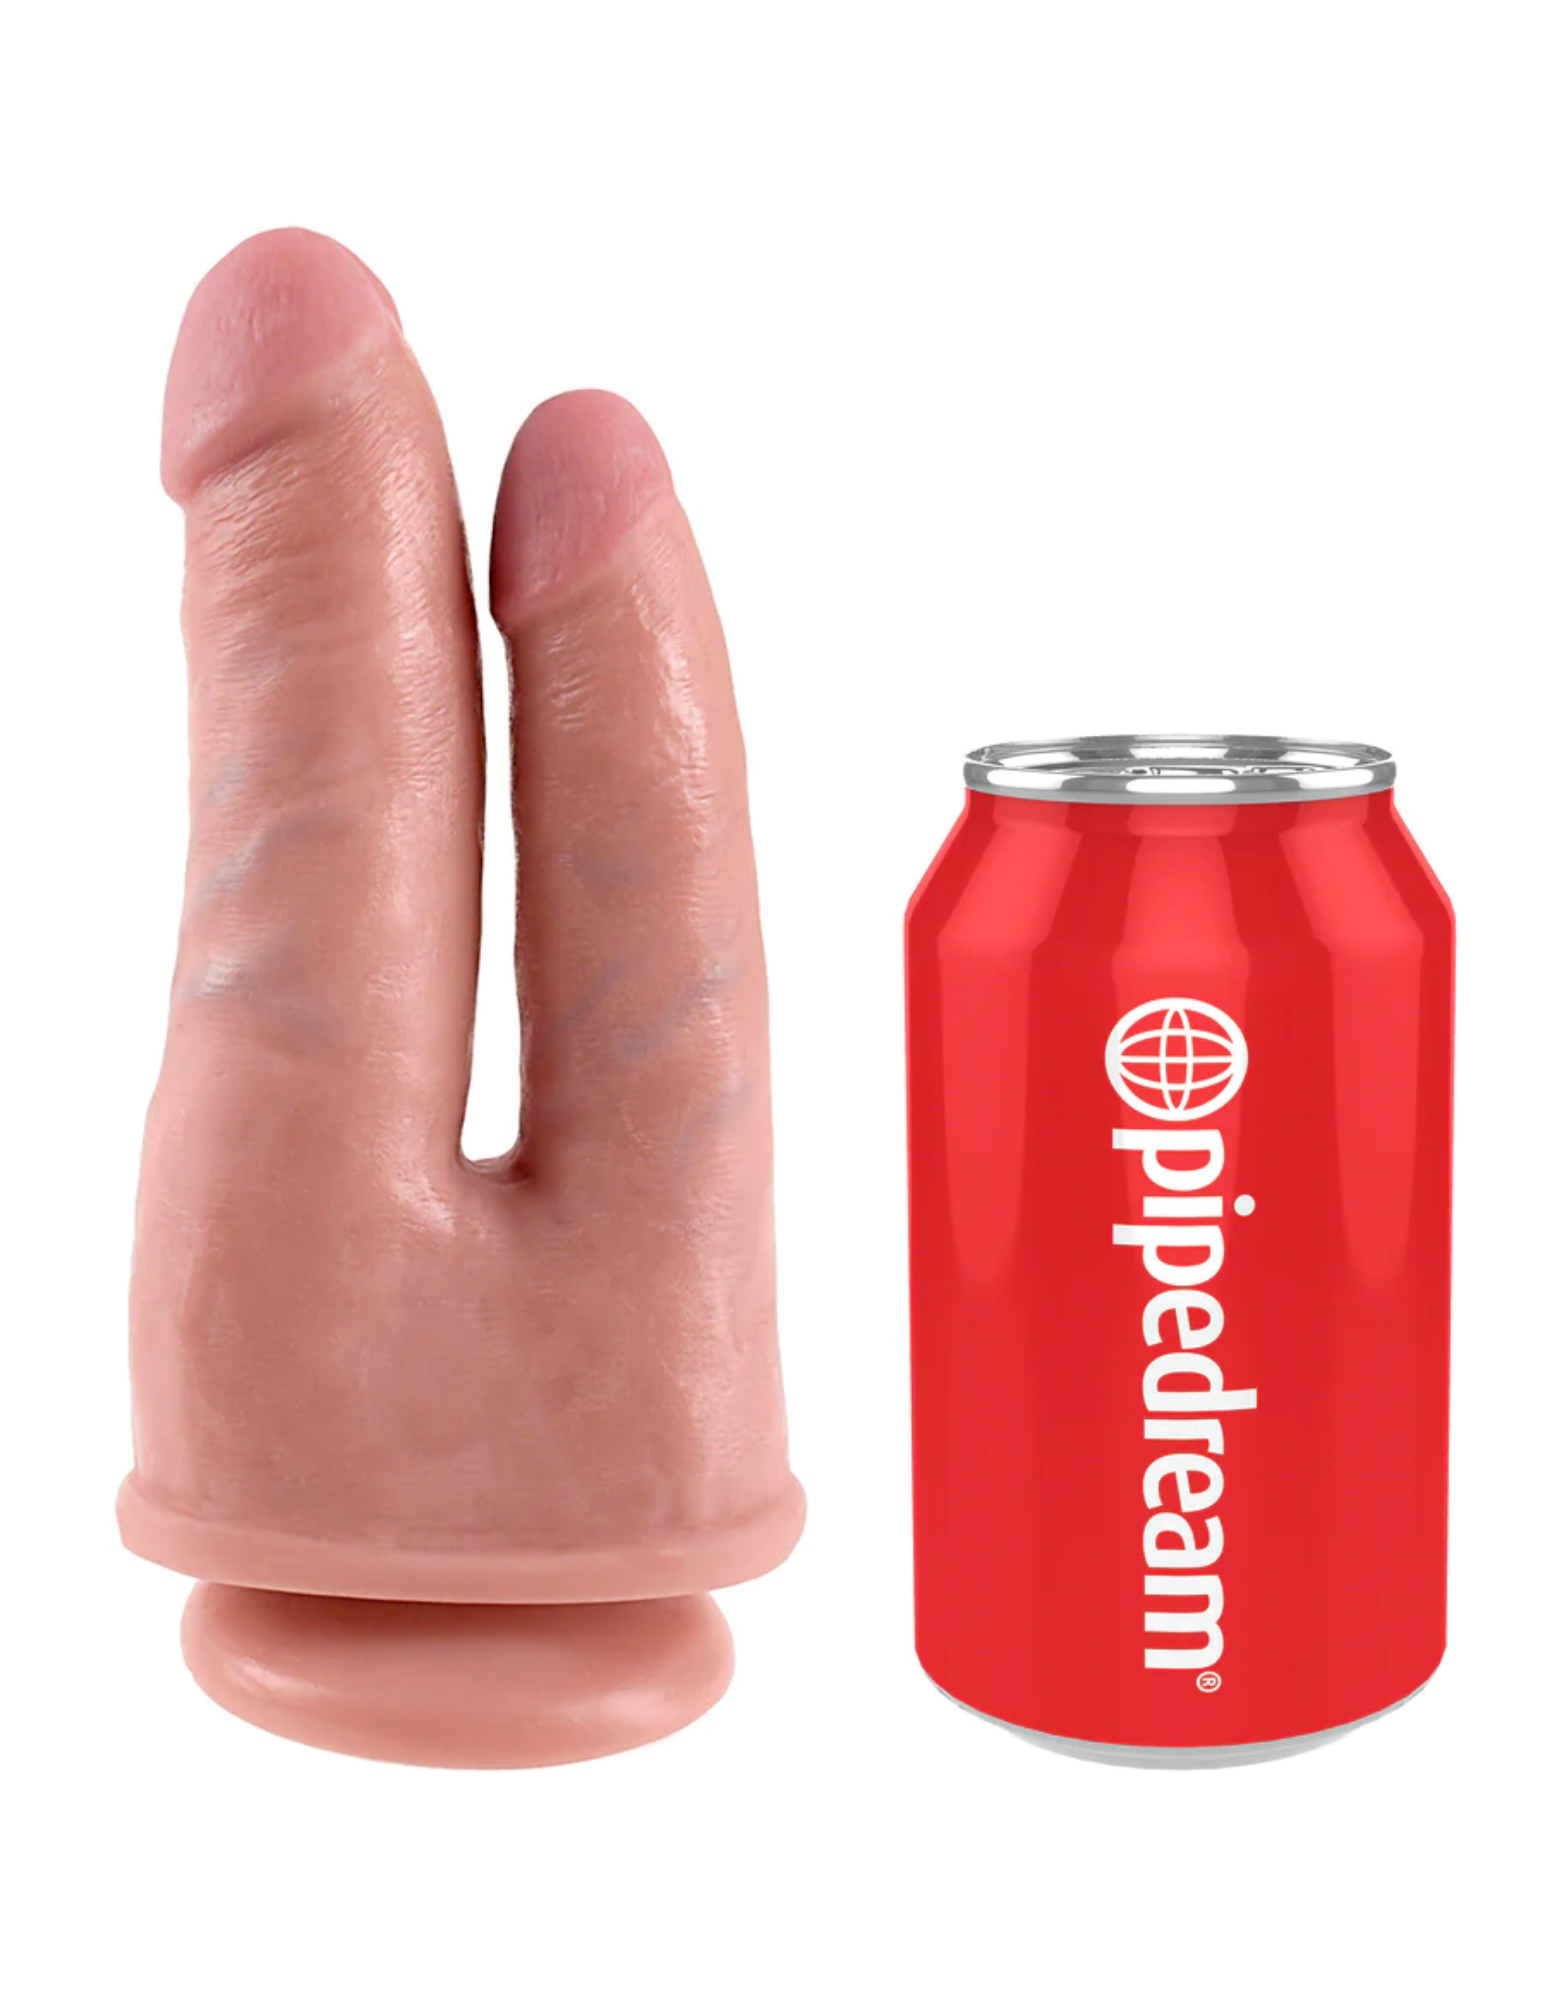 Photo shows the King Cock Double Penetrator Dildo from Pipedreams (vanilla) next to a 12oz soda can to show its size by comparison.